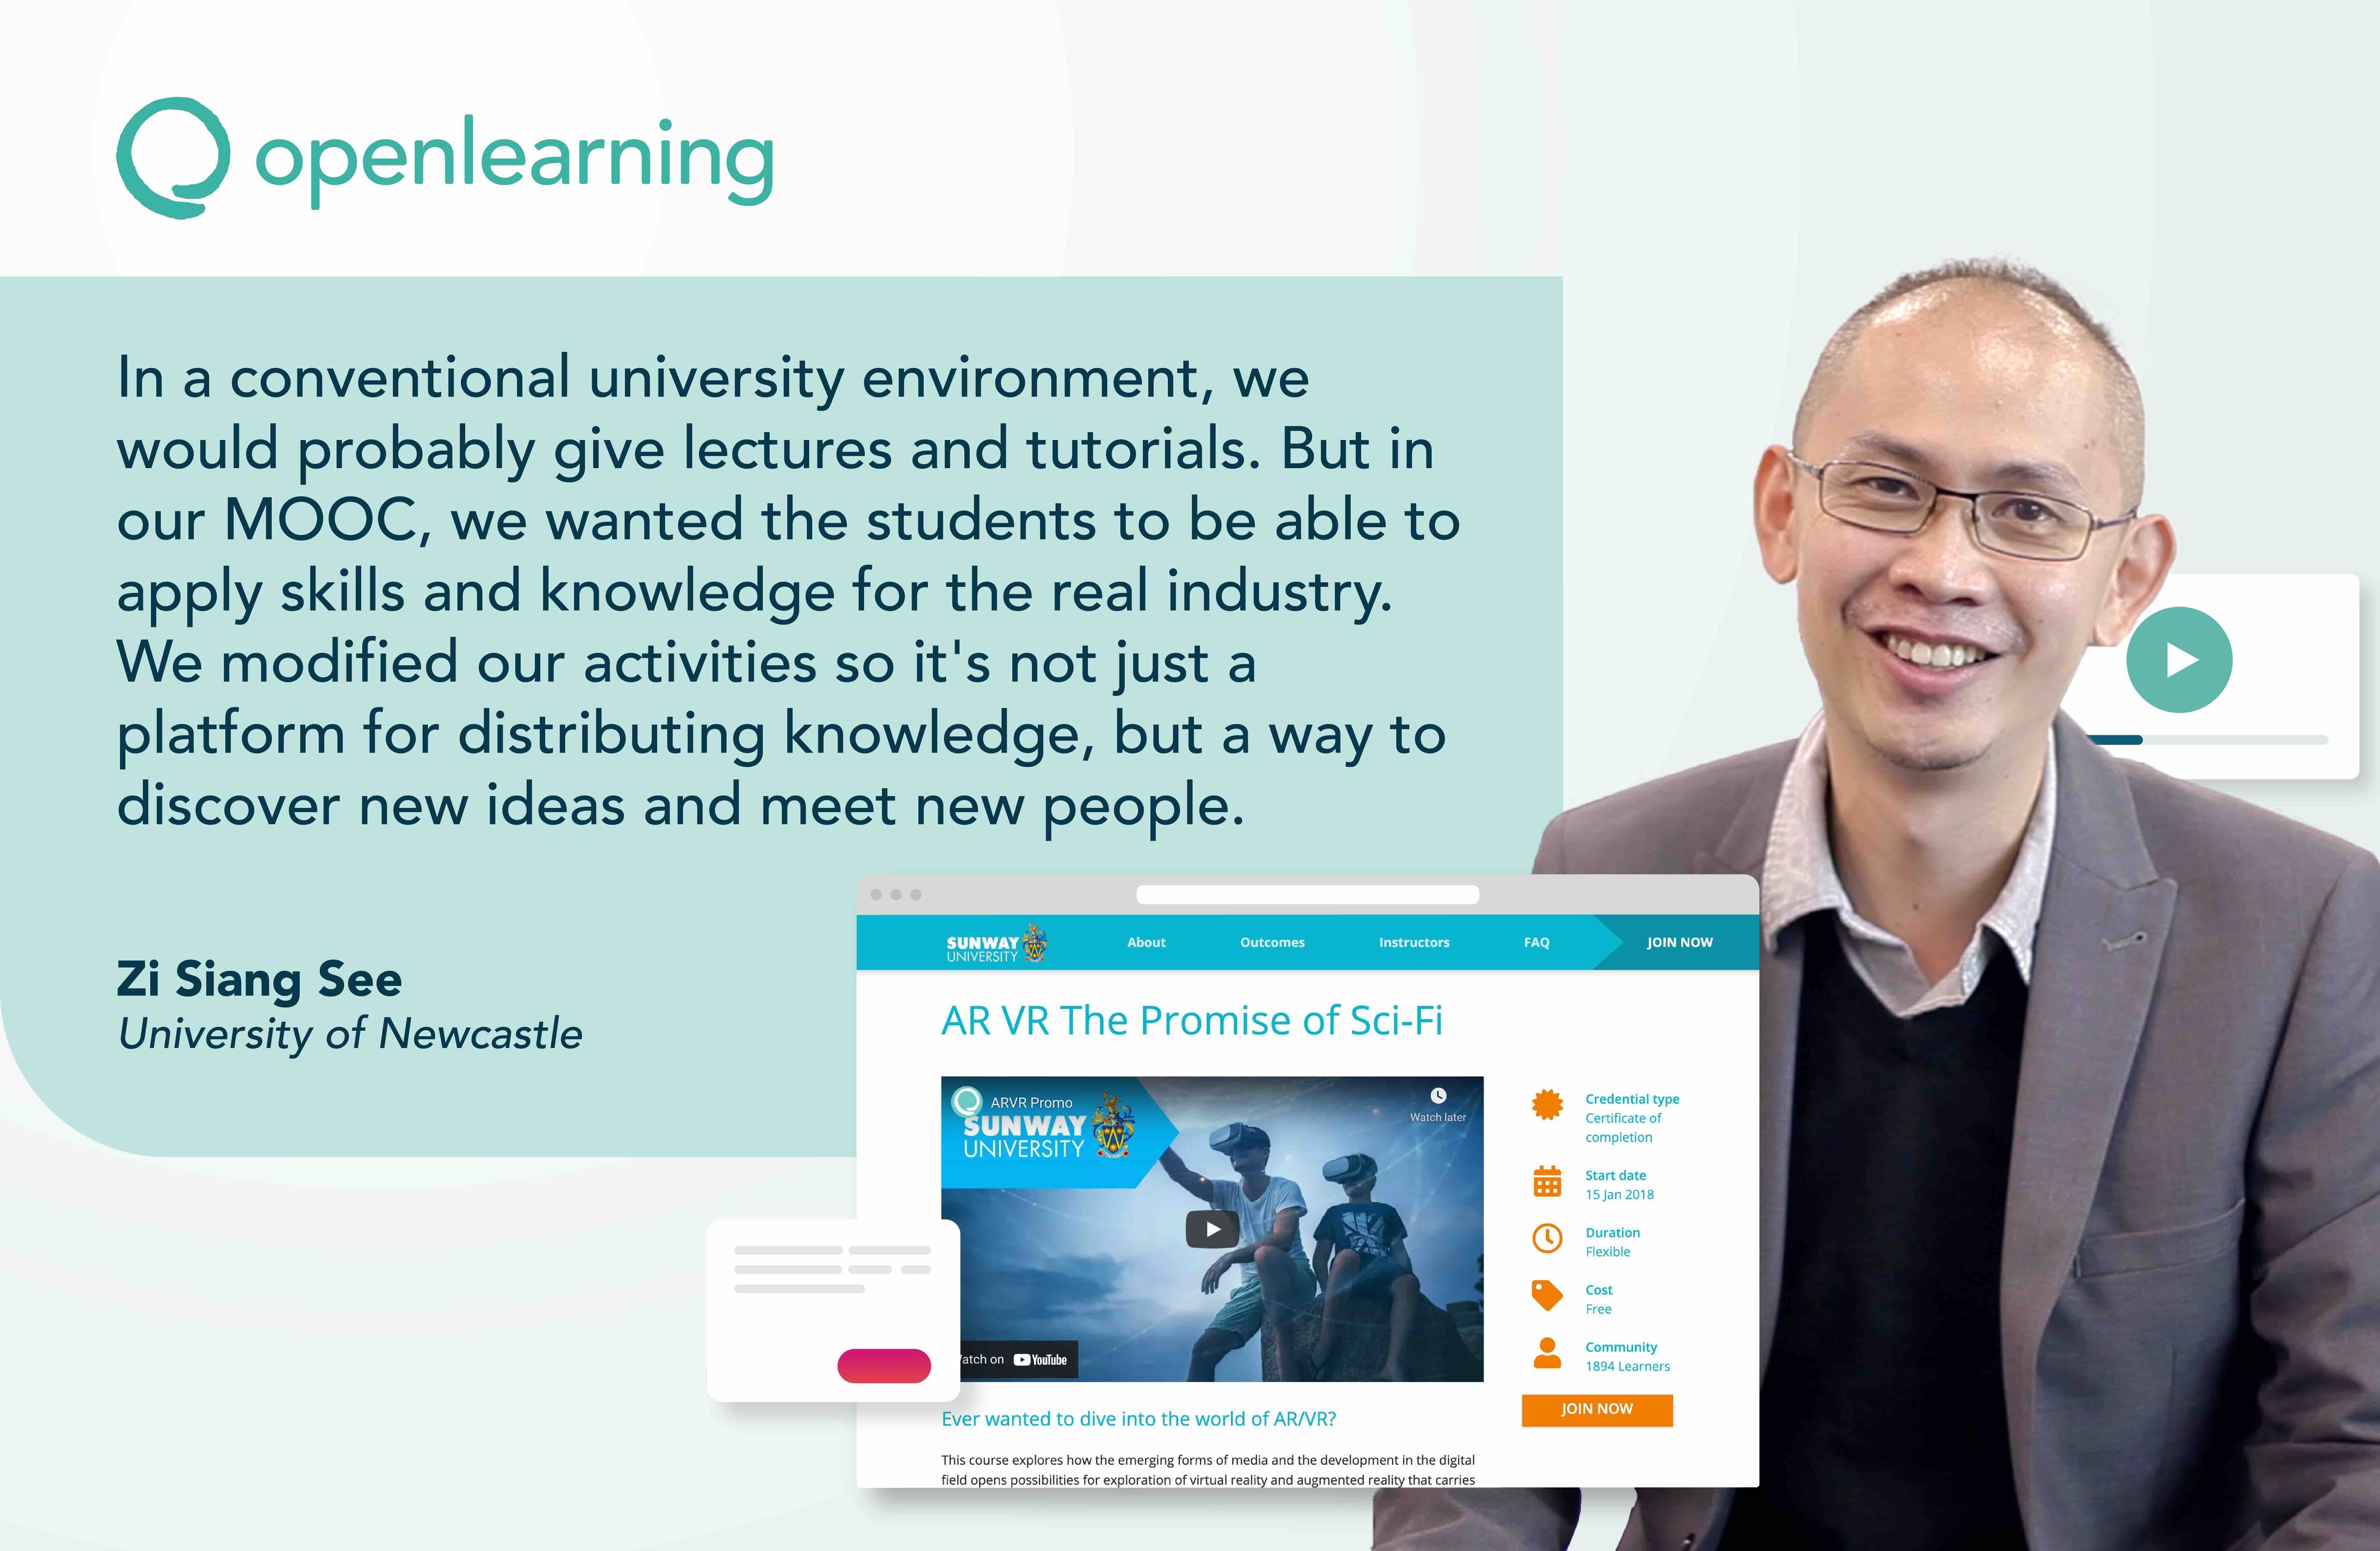 In a conventional university environment, we would probably give lectures and tutorials. But in our MOOC, we wanted the students to be able to apply skills and knowledge for the real industry. We modified our activities so it's not just a platform for distributing knowledge, but a way to discover new ideas and meet new people.  Zi Siang See, University of Newcastle, OpenLearning.